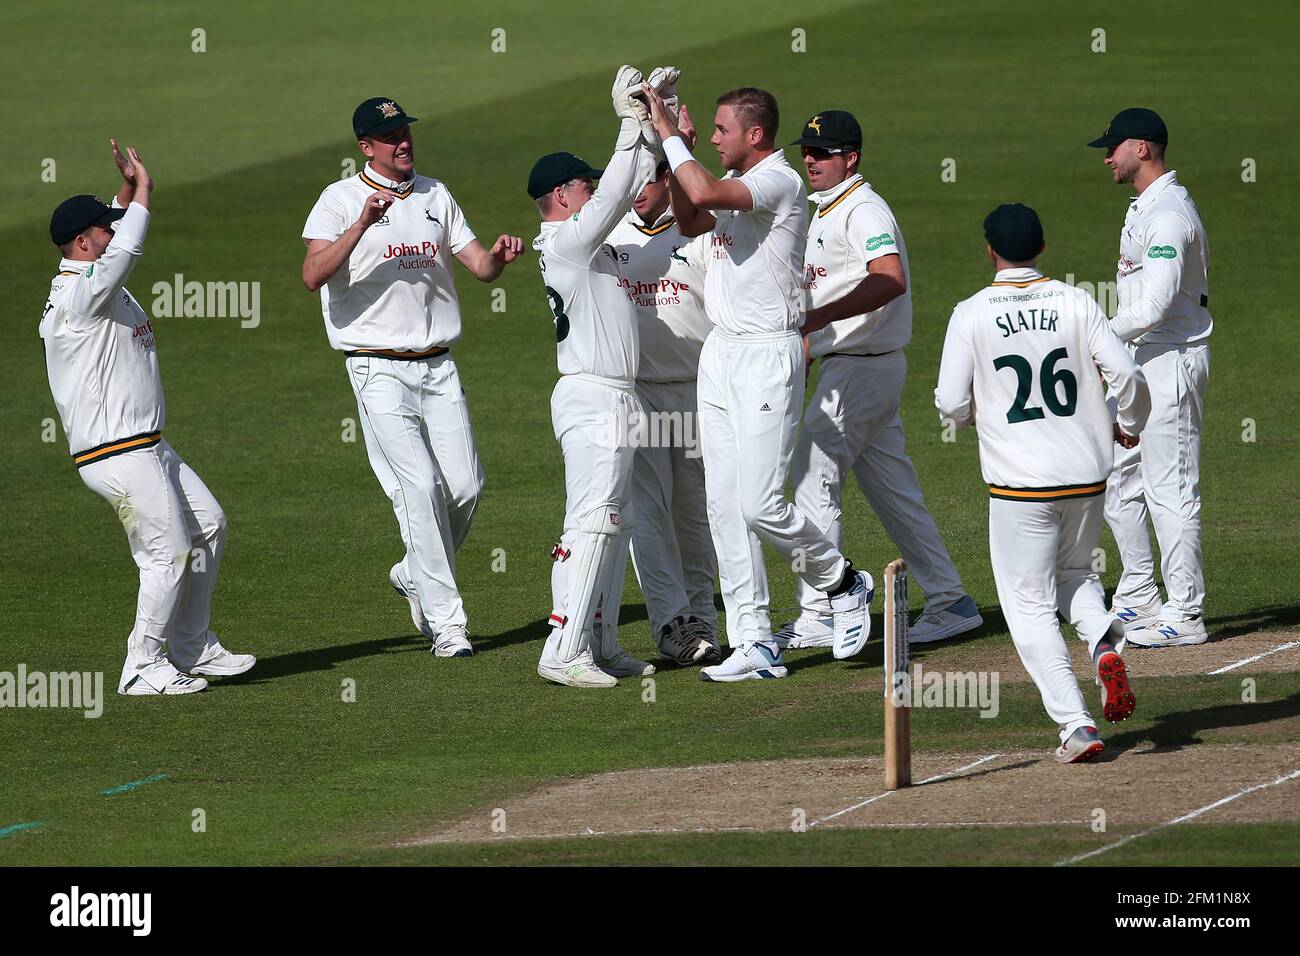 Stuart Broad of Nottinghamshire celebrates with his team mates after taking the wicket of Alastair Cook during Nottinghamshire CCC vs Essex CCC, Specs Stock Photo